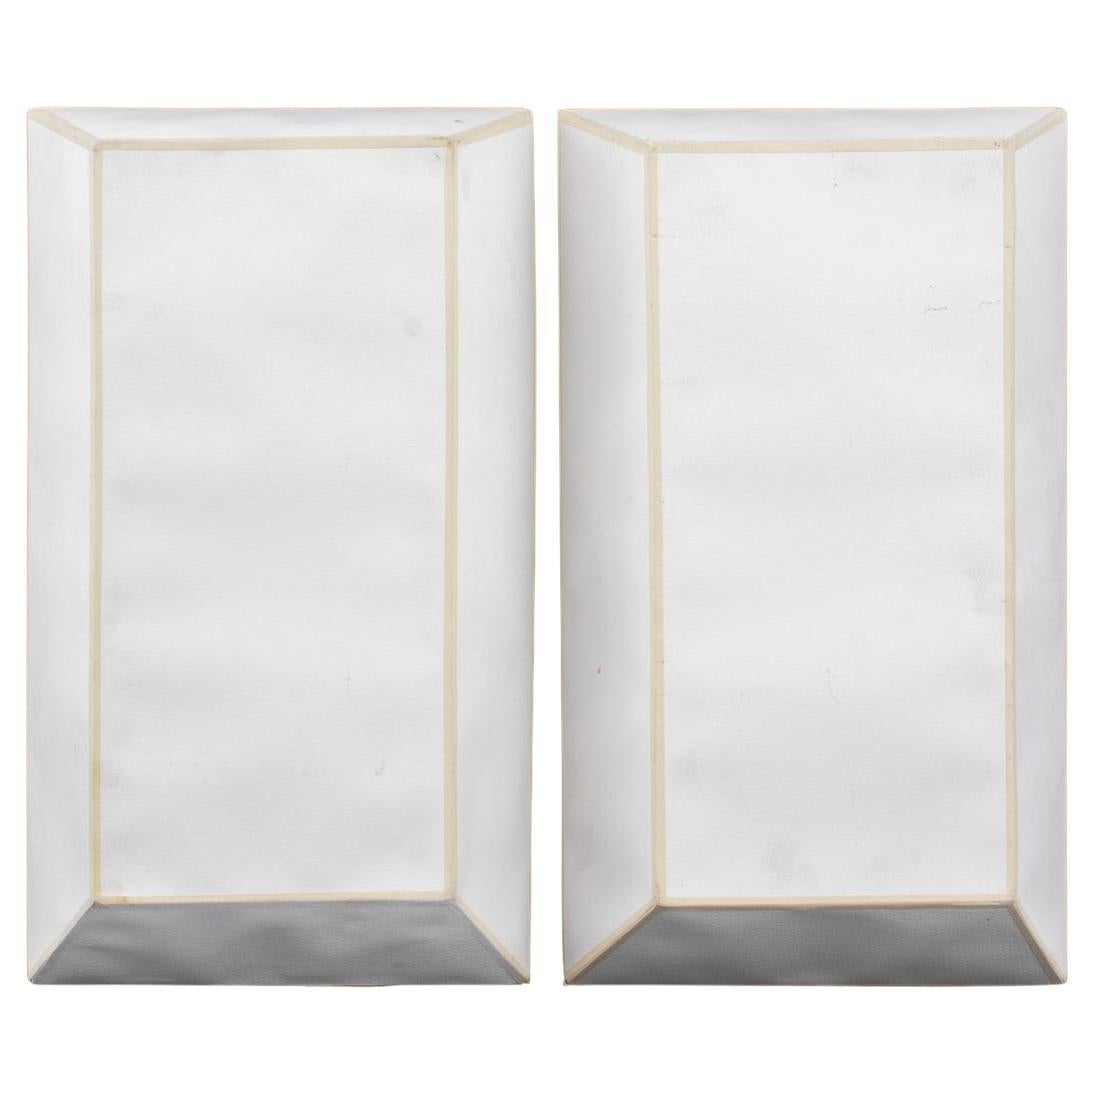 Christian Liaigre, Mercer Kitchen Wall Sconces, Pair